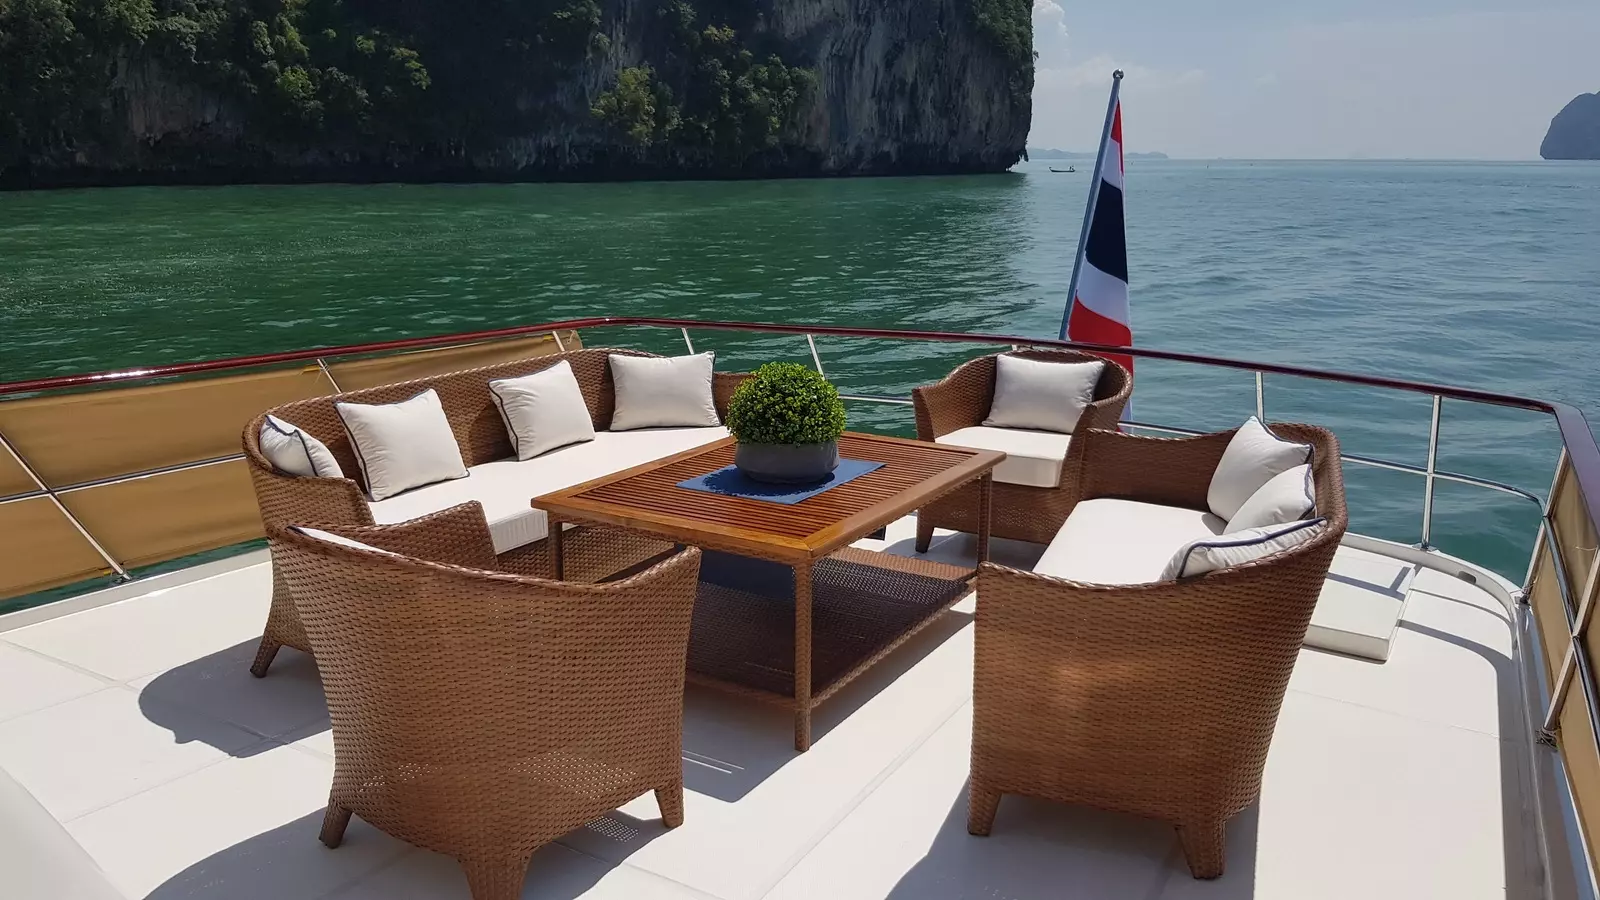 Sea Princess by Defever - Special Offer for a private Motor Yacht Charter in Koh Samui with a crew